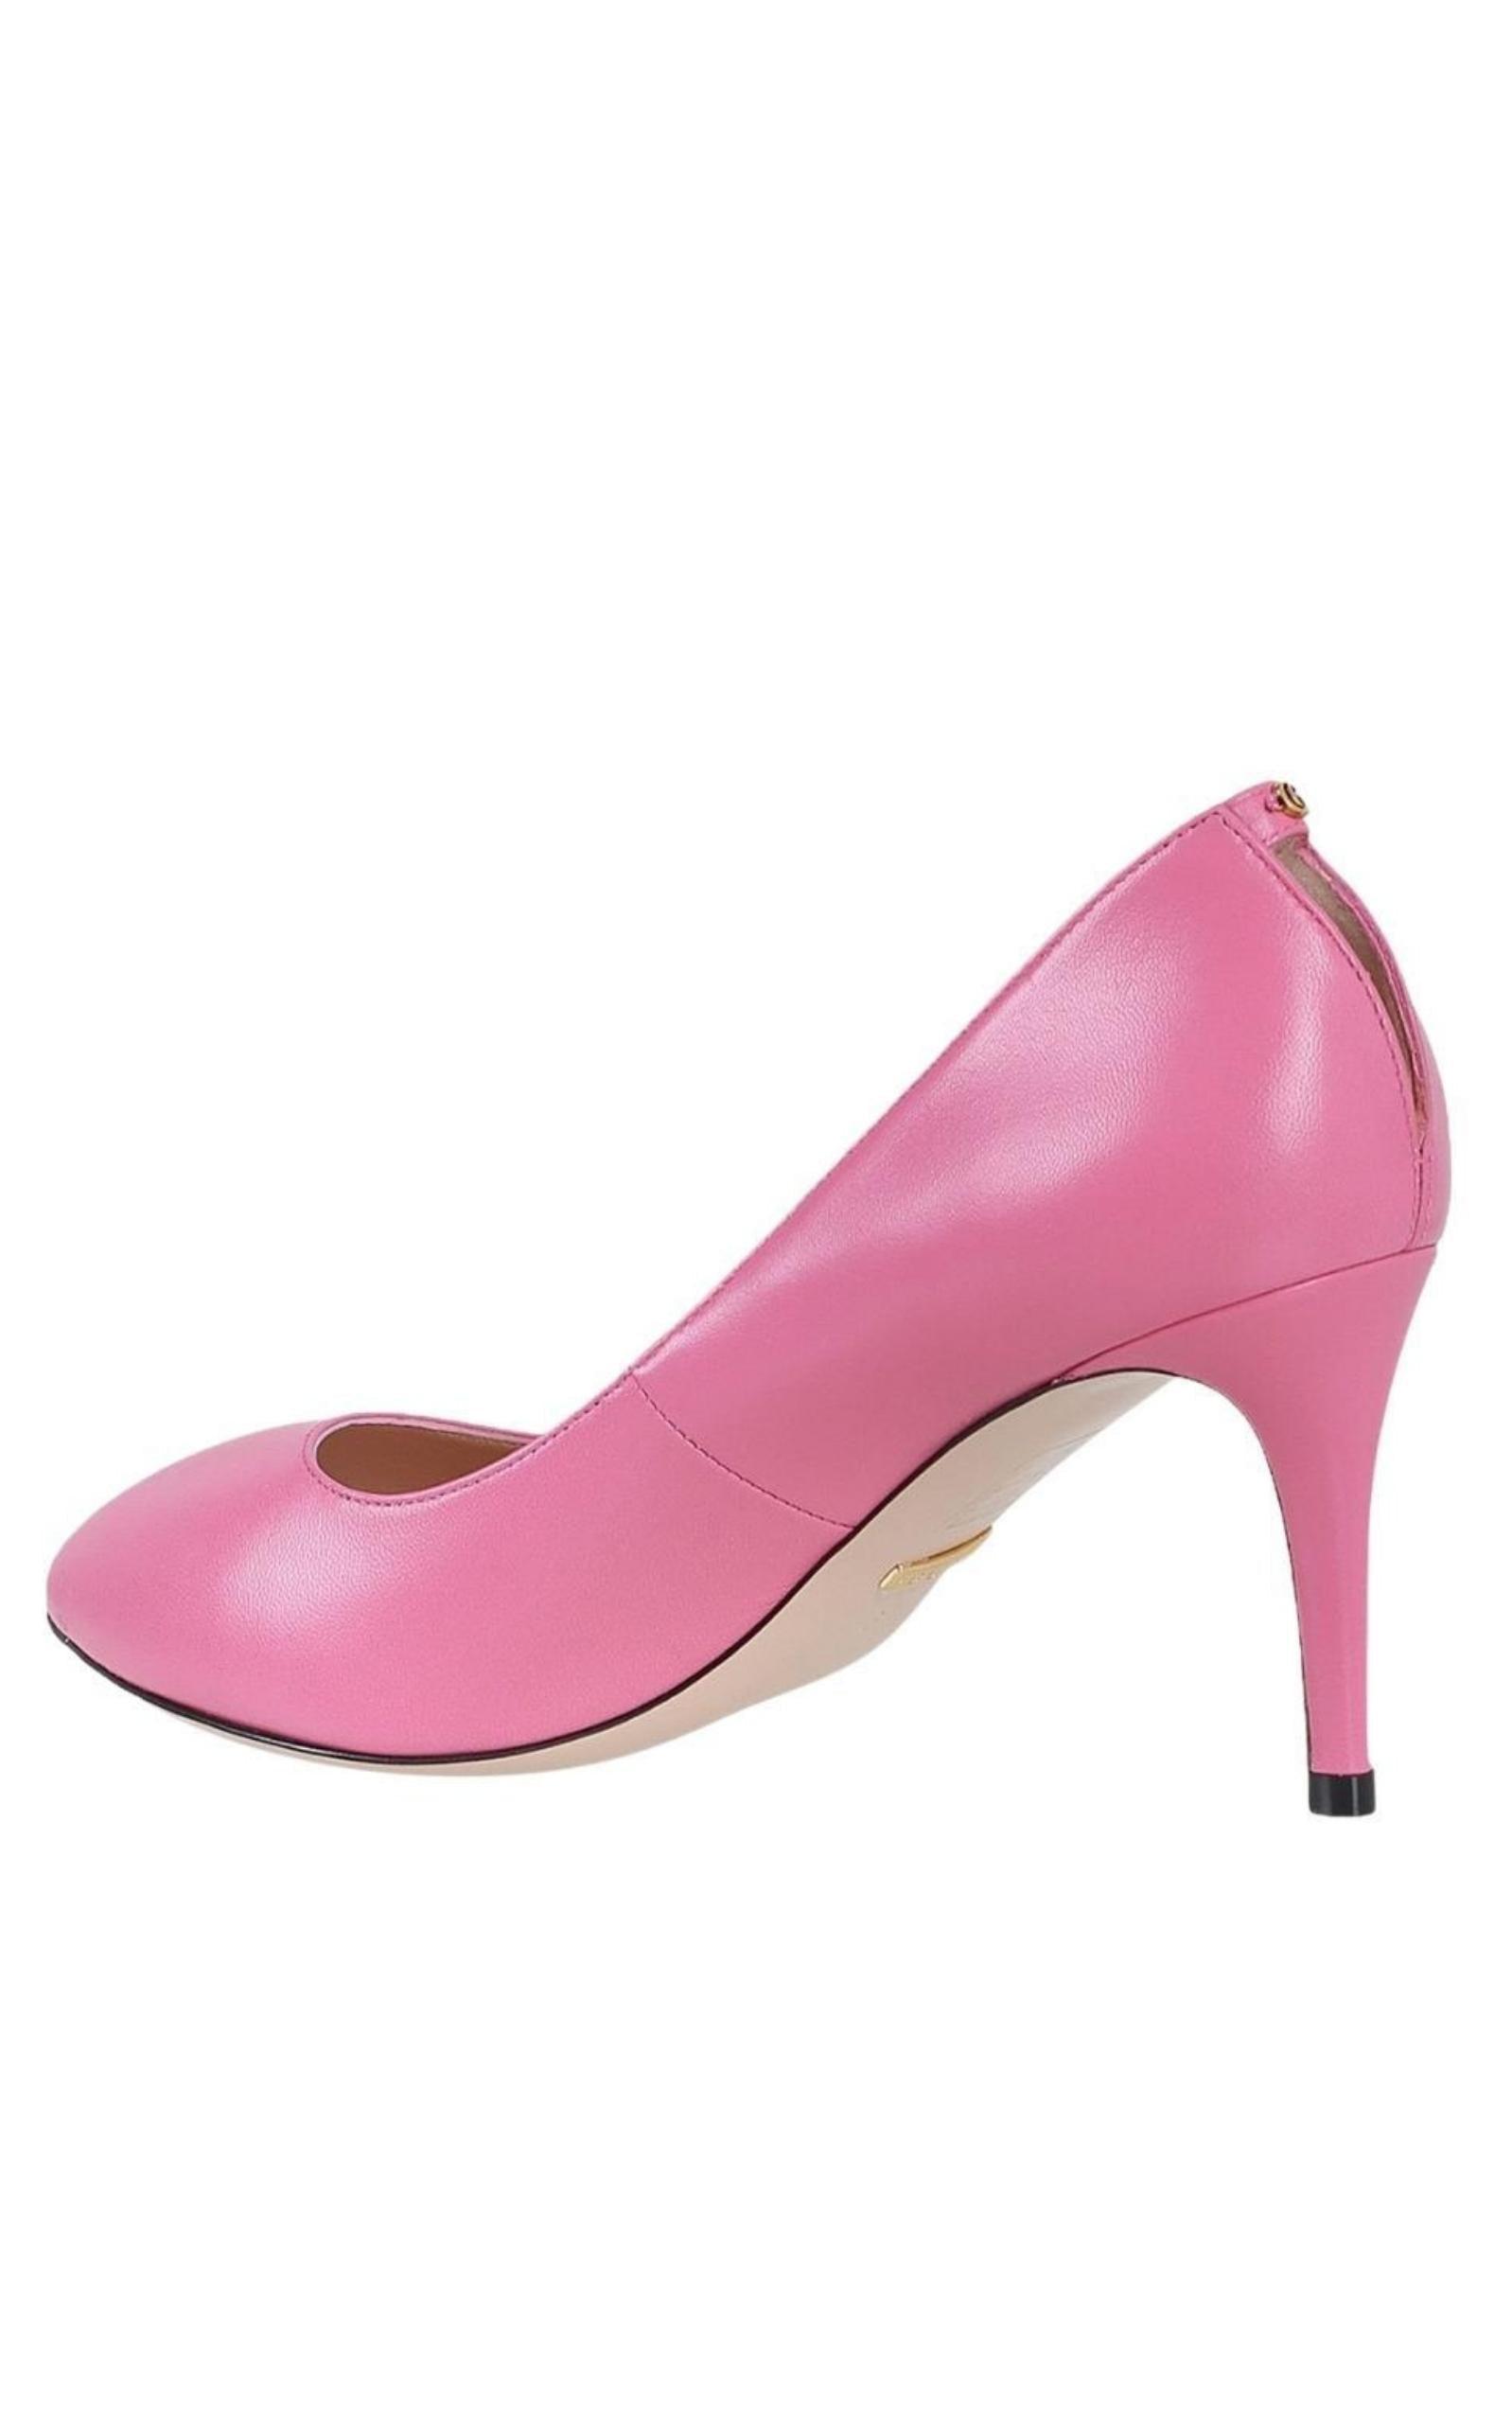  GucciPink Leather Stiletto Pump - Runway Catalog